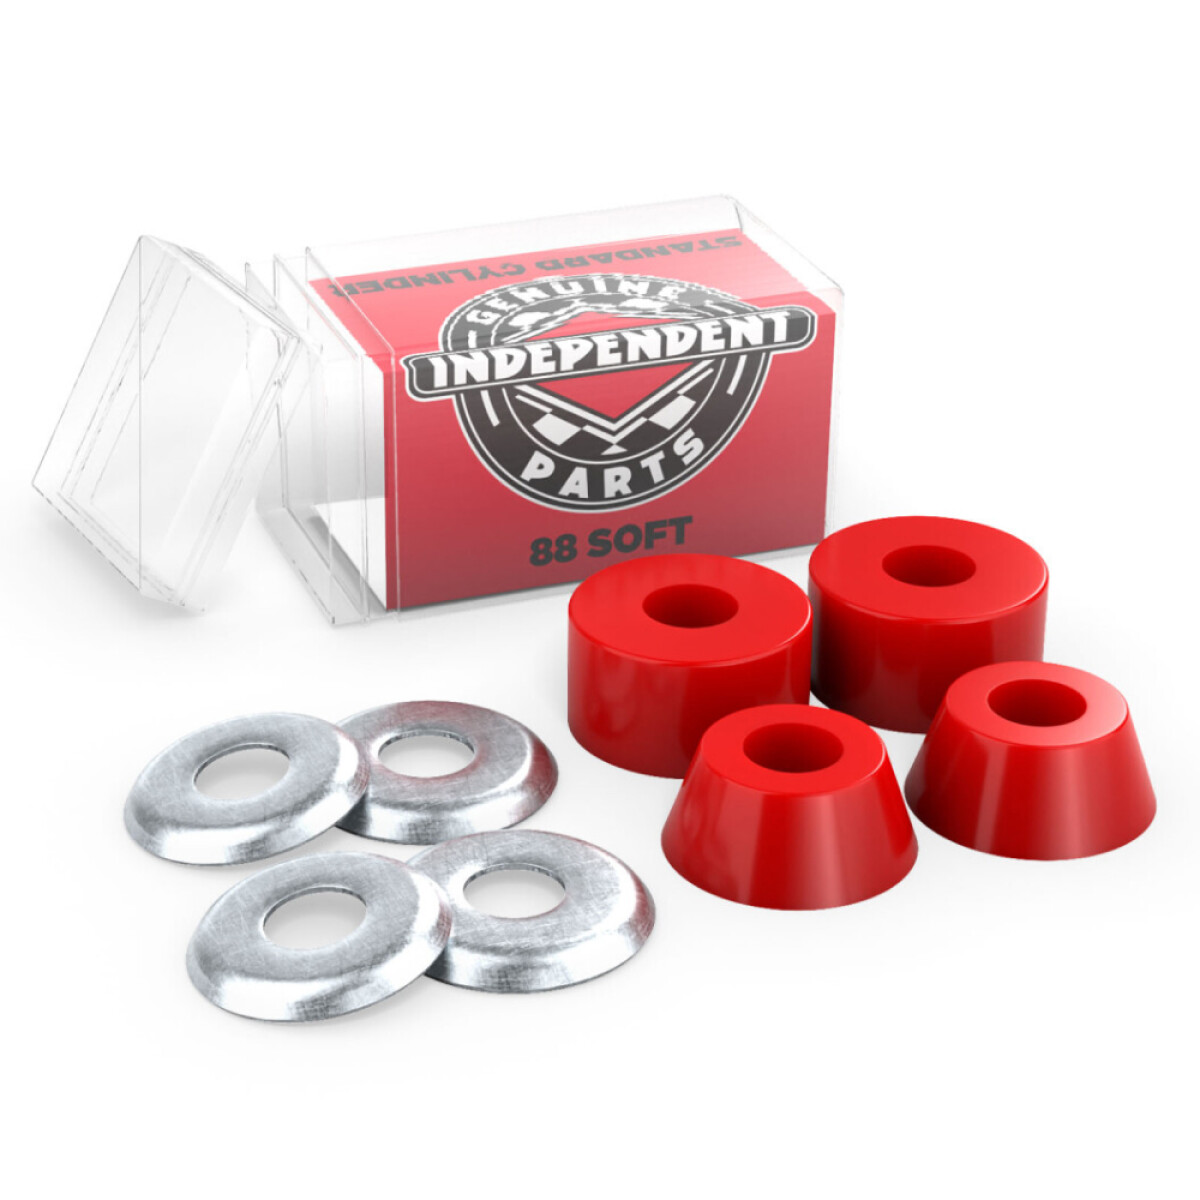 Bushings Independent Soft 88A 